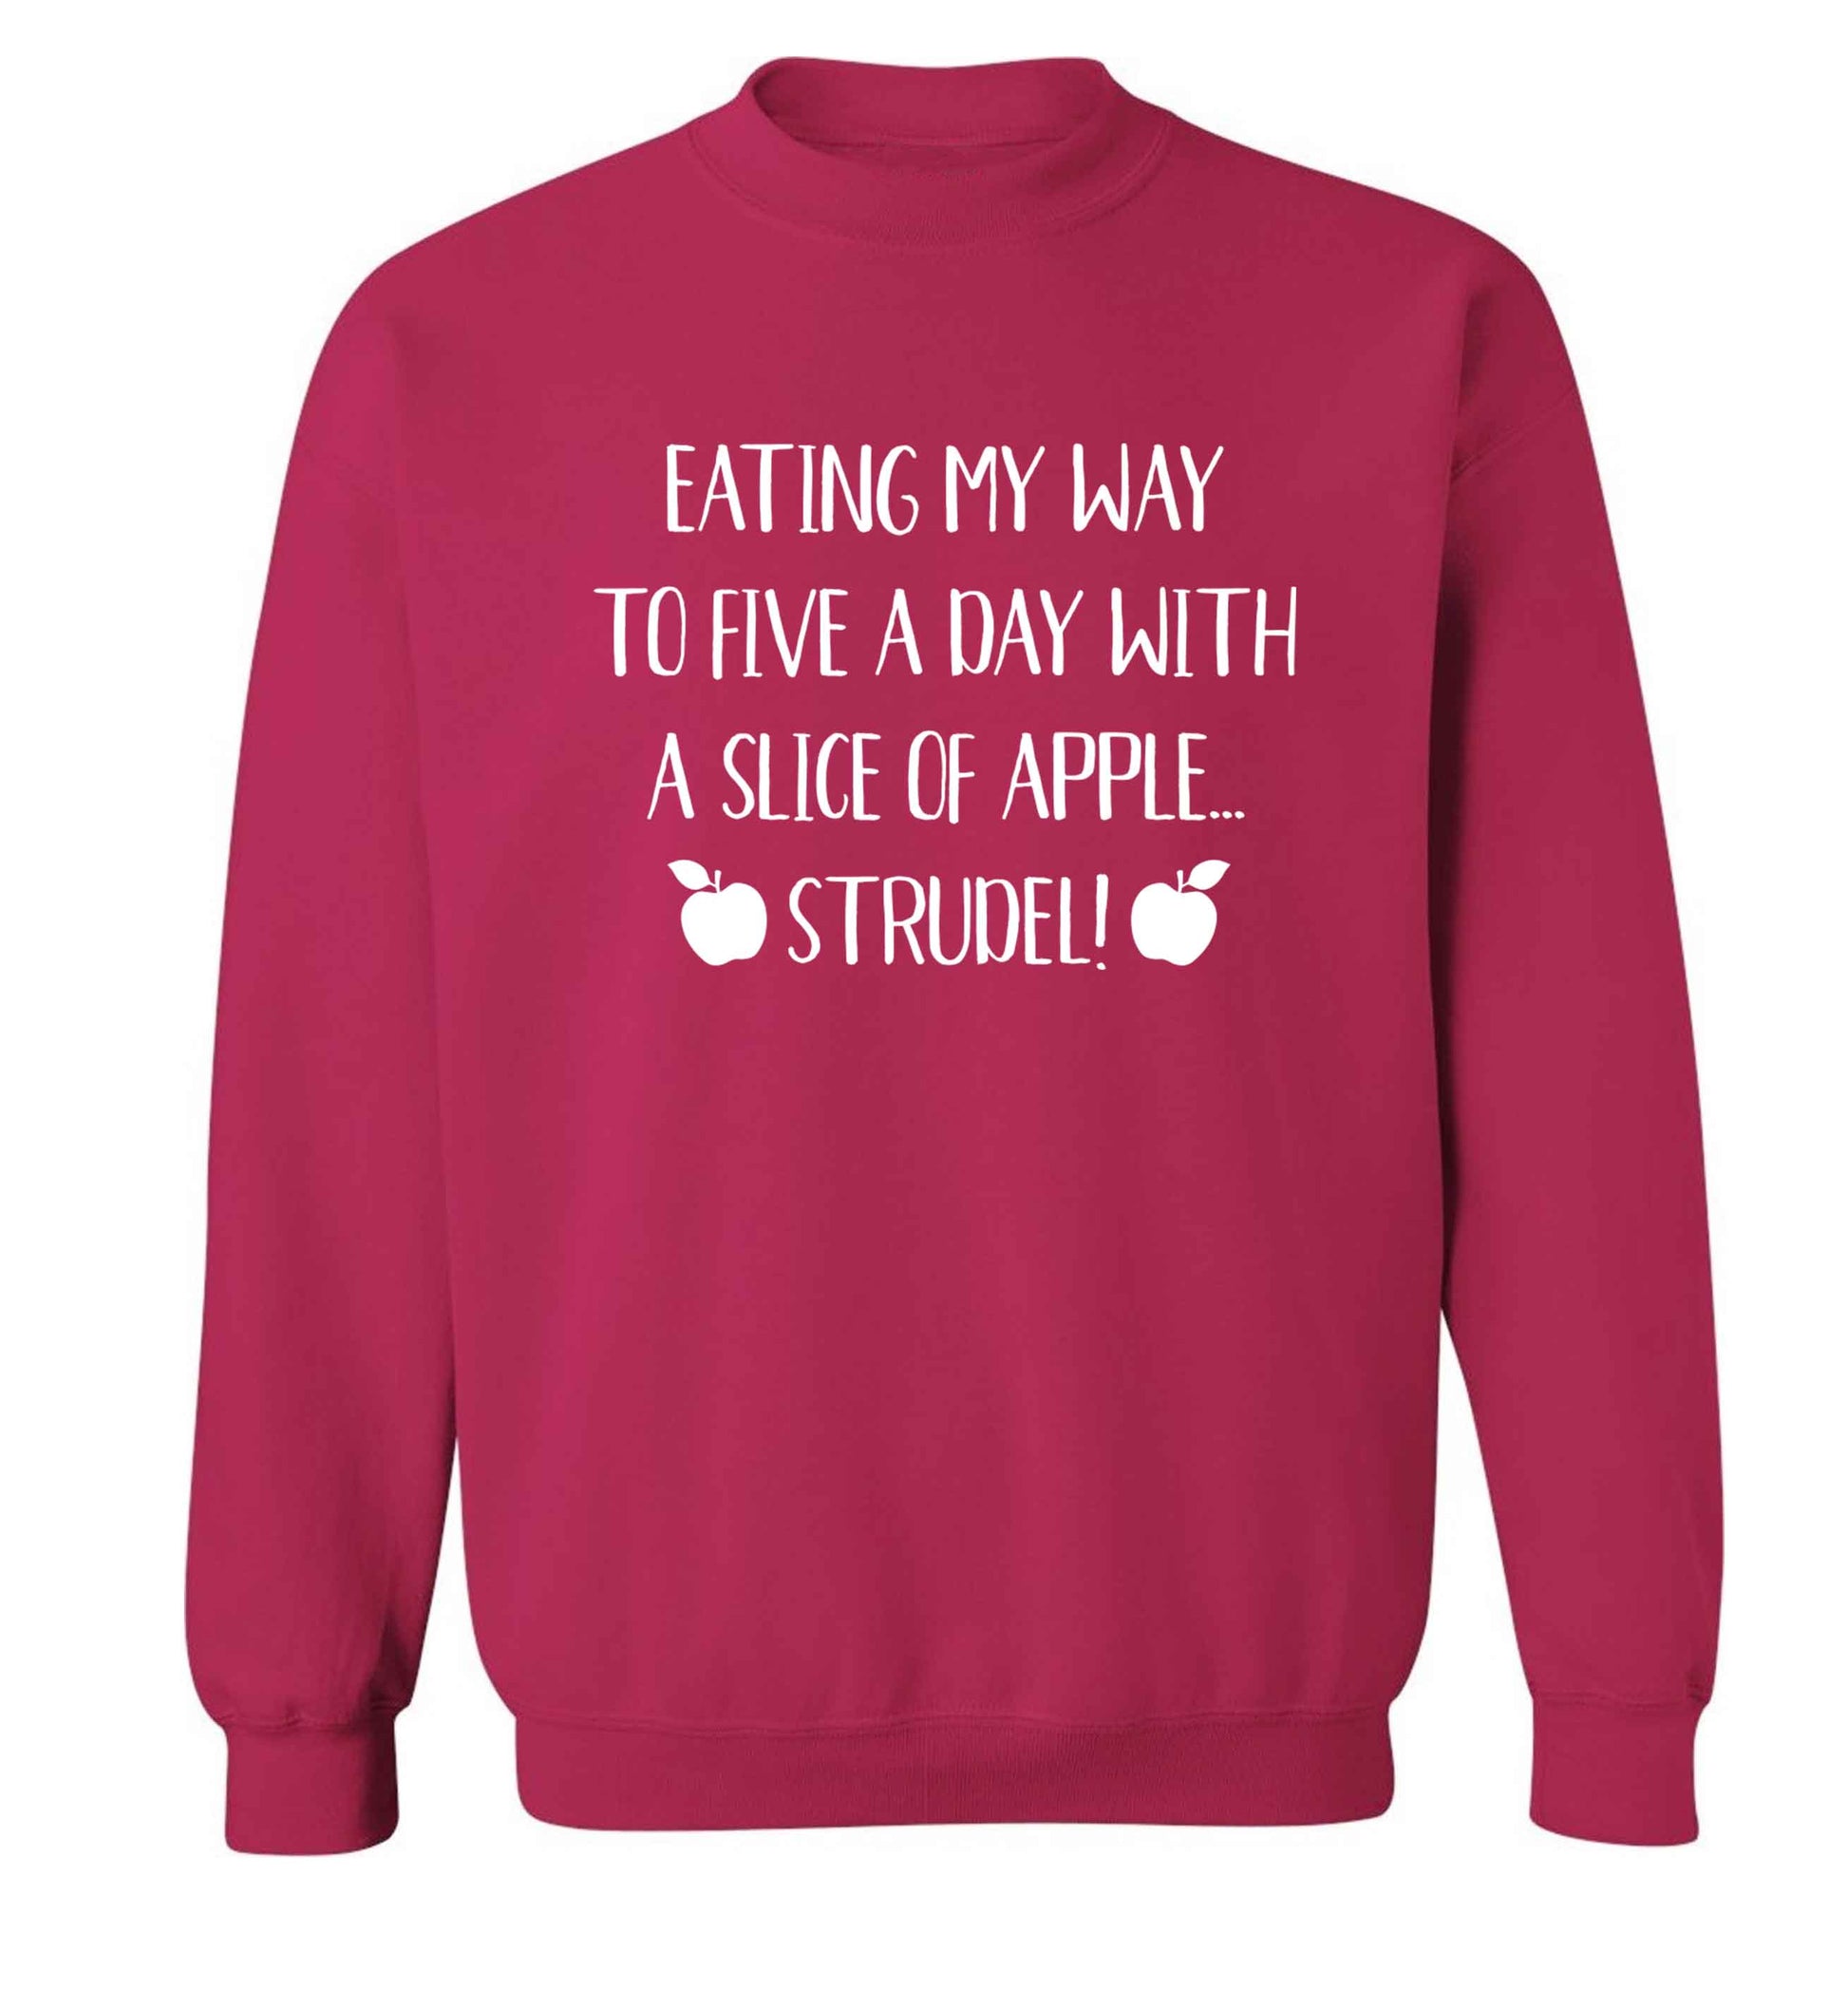 Eating my way to five a day with a slice of apple strudel Adult's unisex pink Sweater 2XL